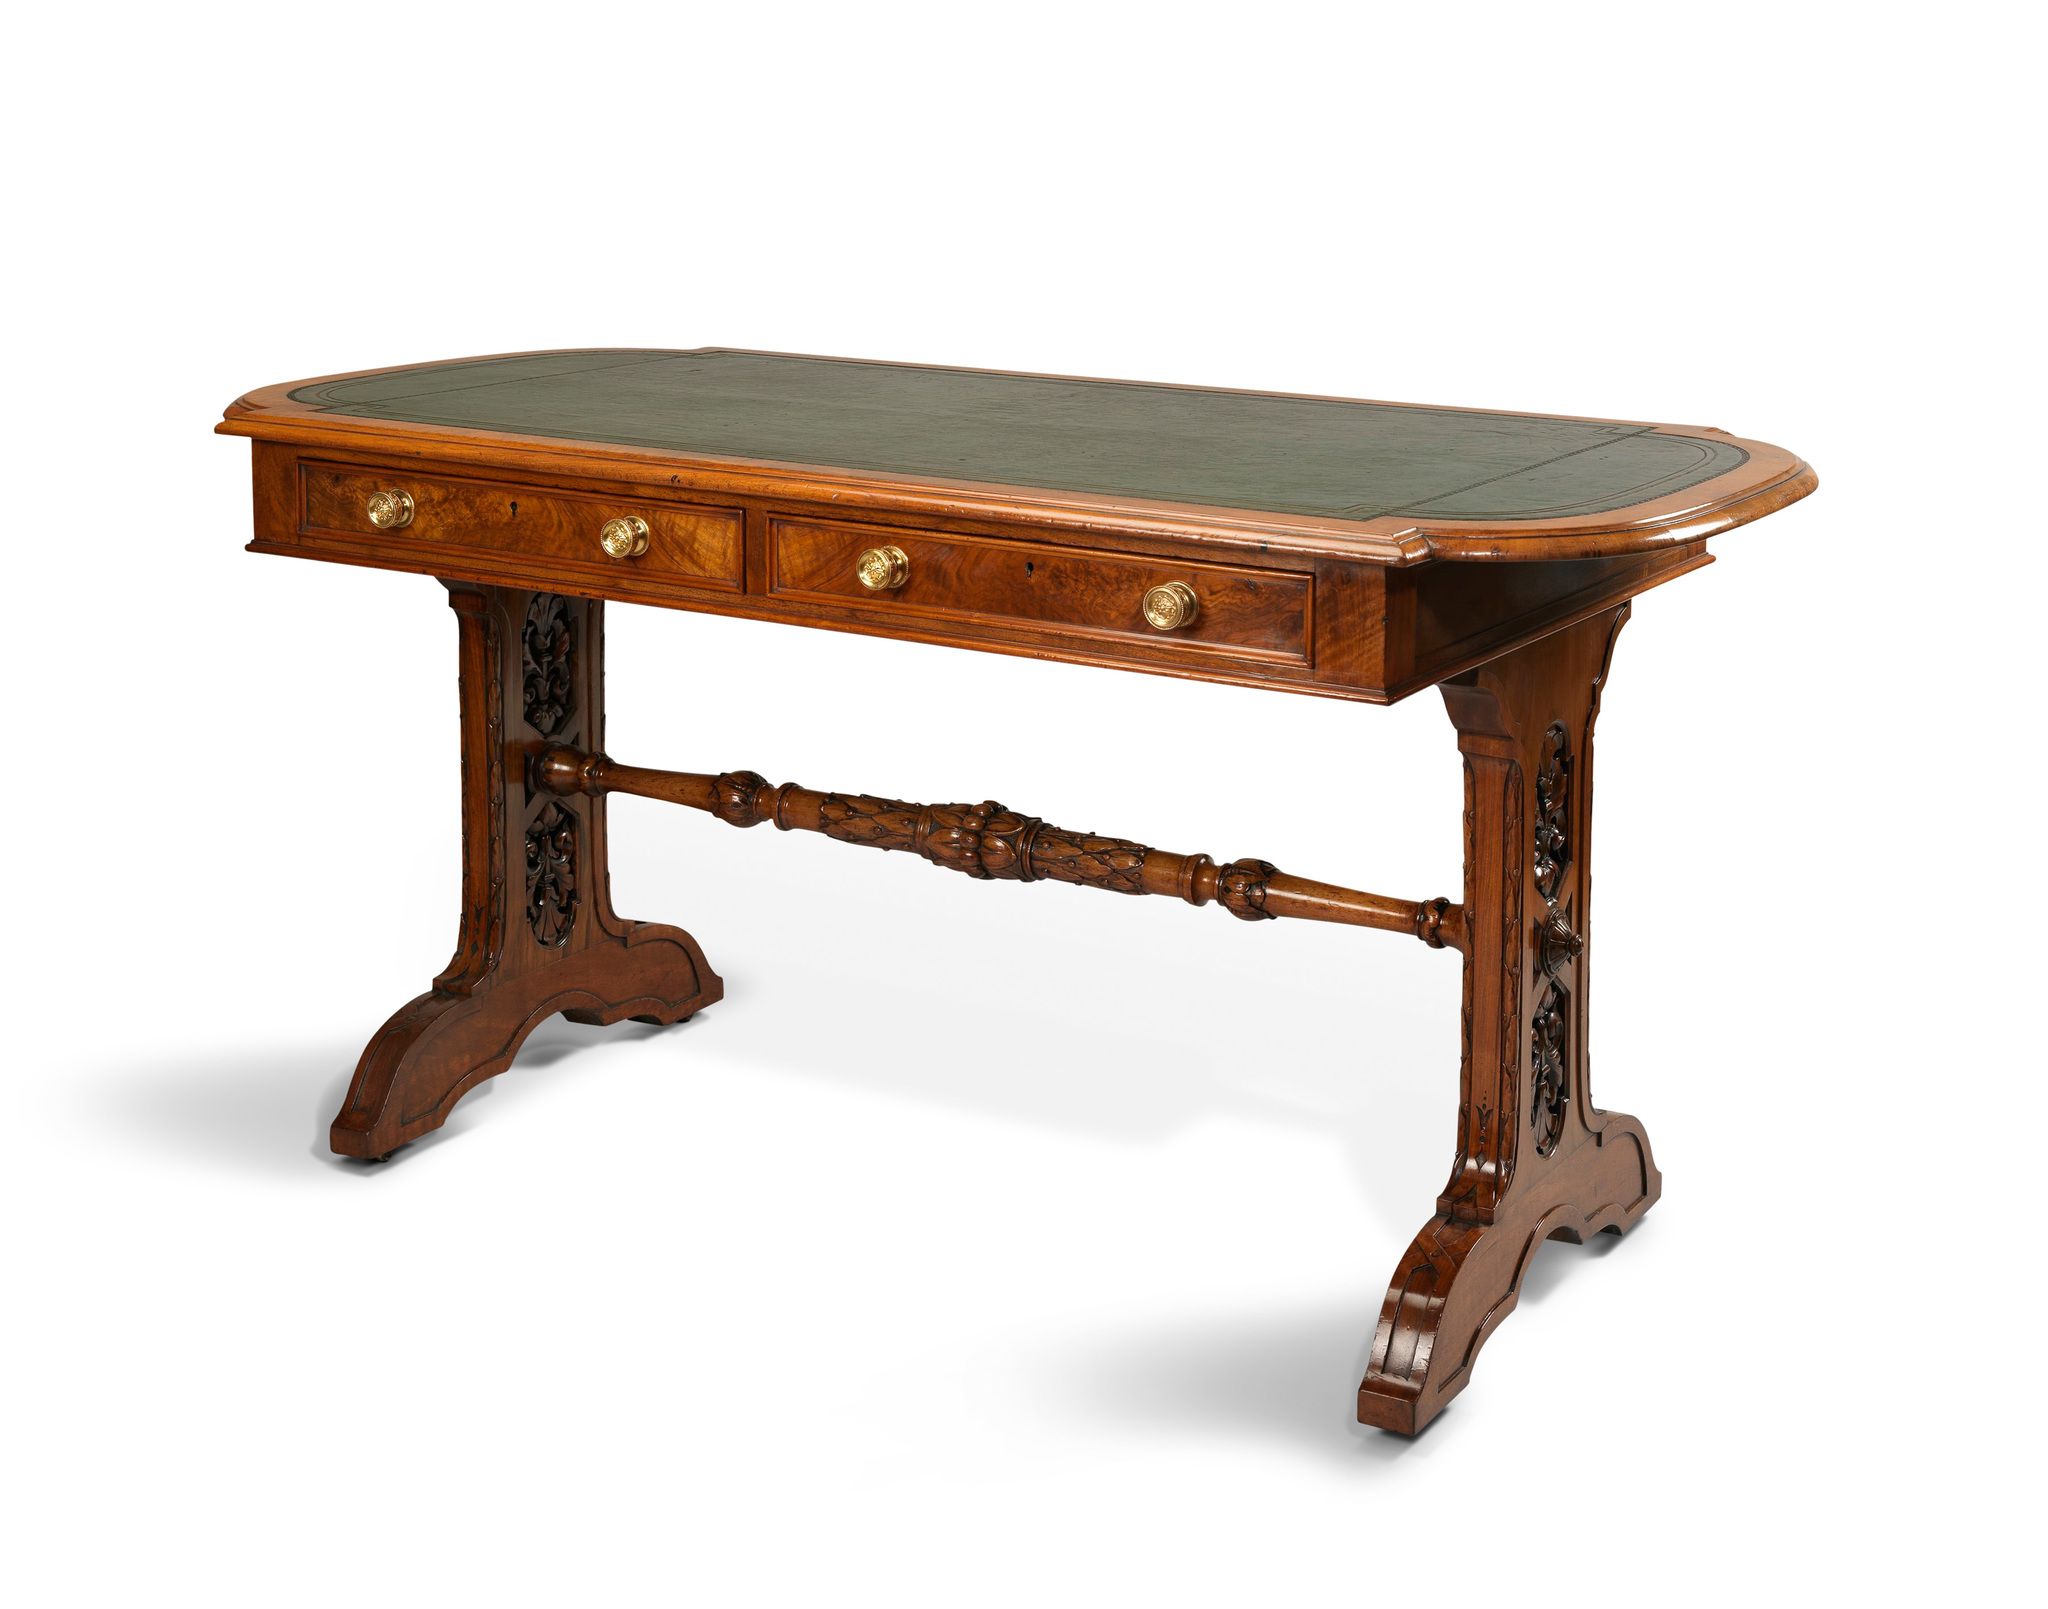 A Victorian Writing Table England circa 1840, signed by George Trollope and Sons, 15 Parliament